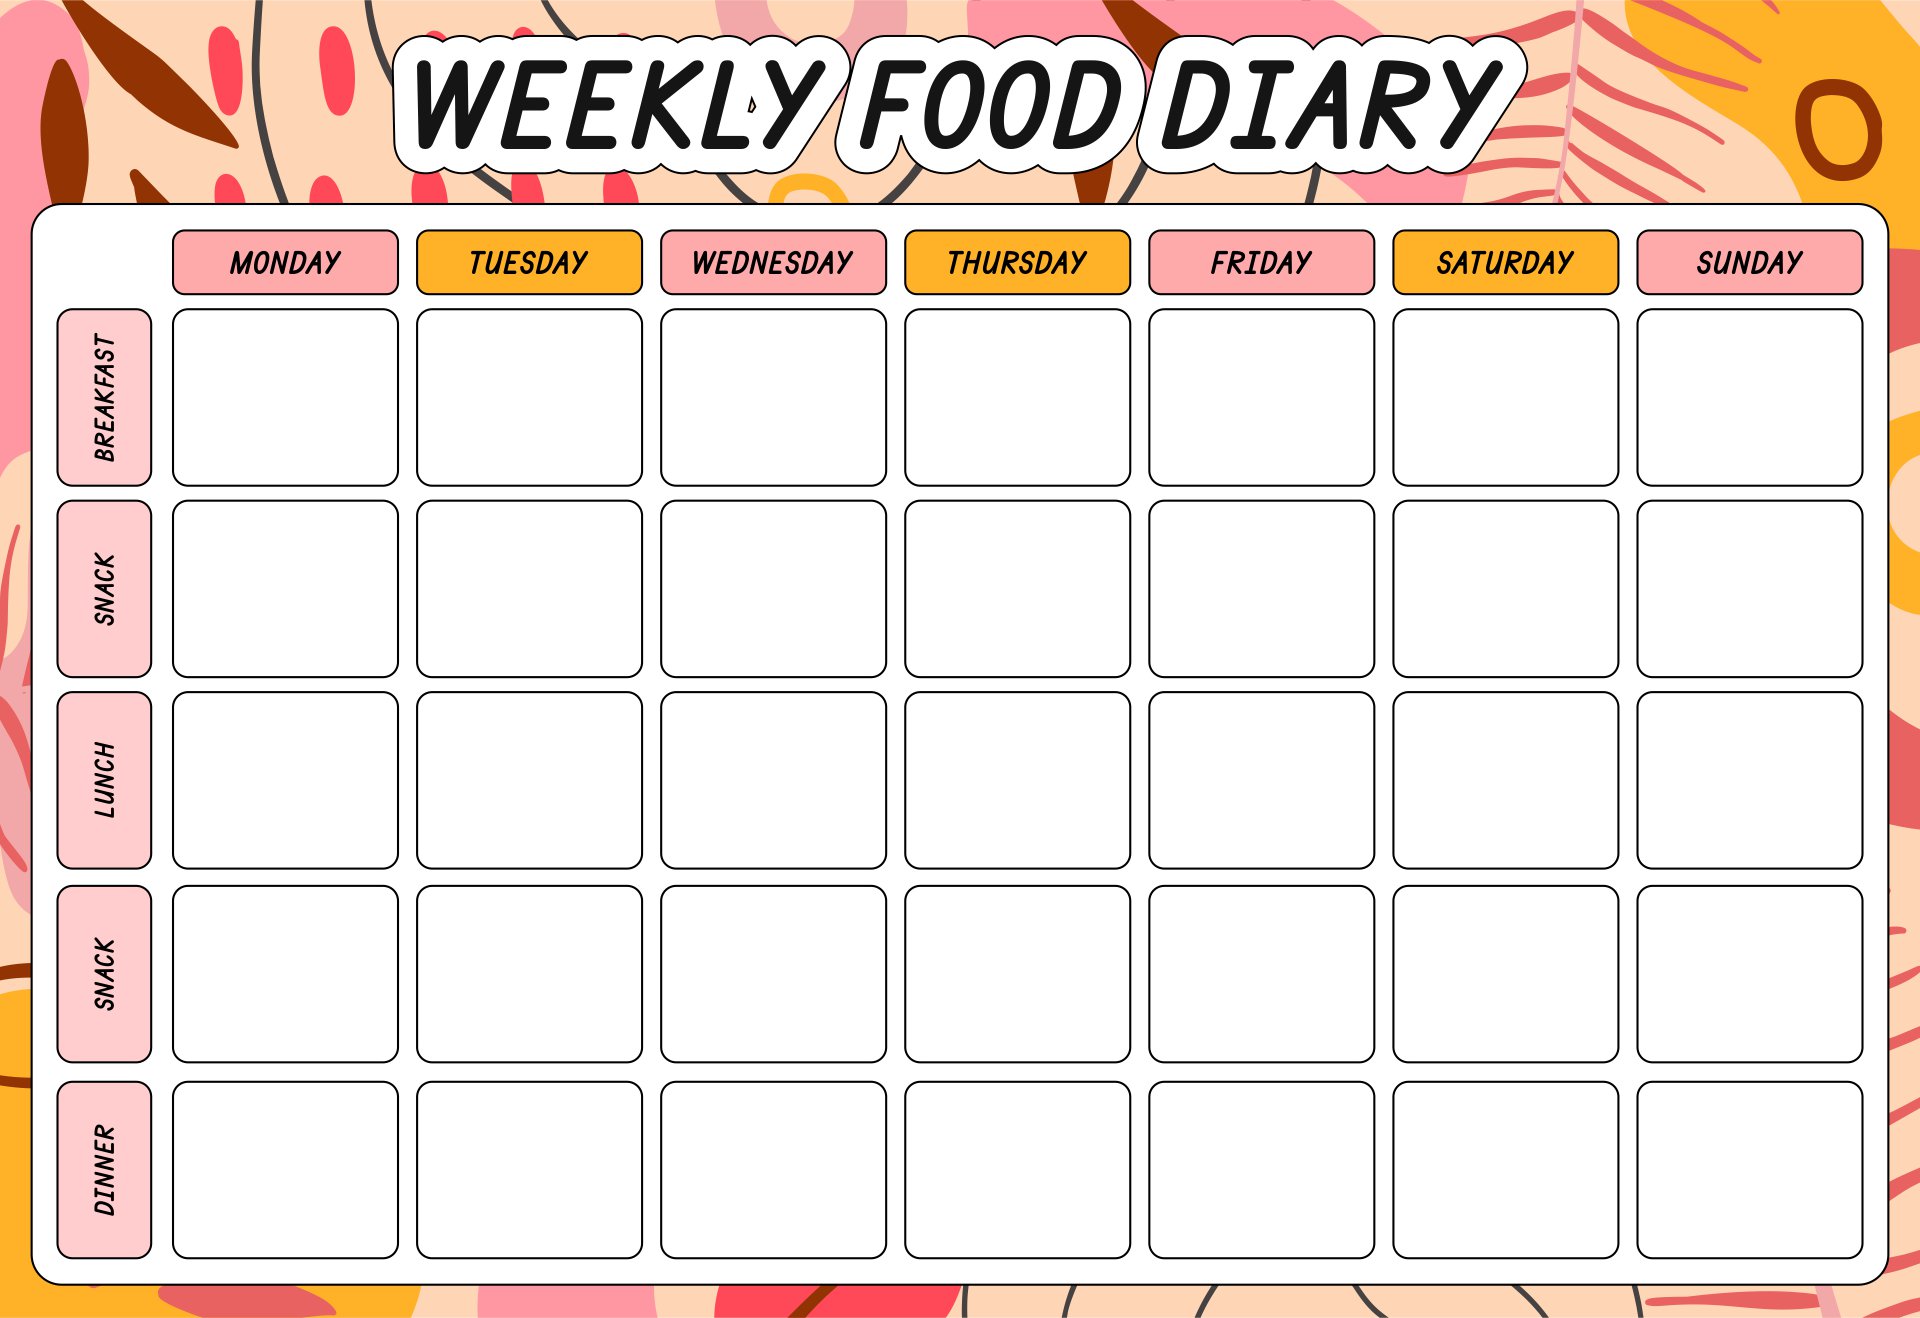 7-best-images-of-printable-7-day-food-log-5-meals-a-day-food-diary